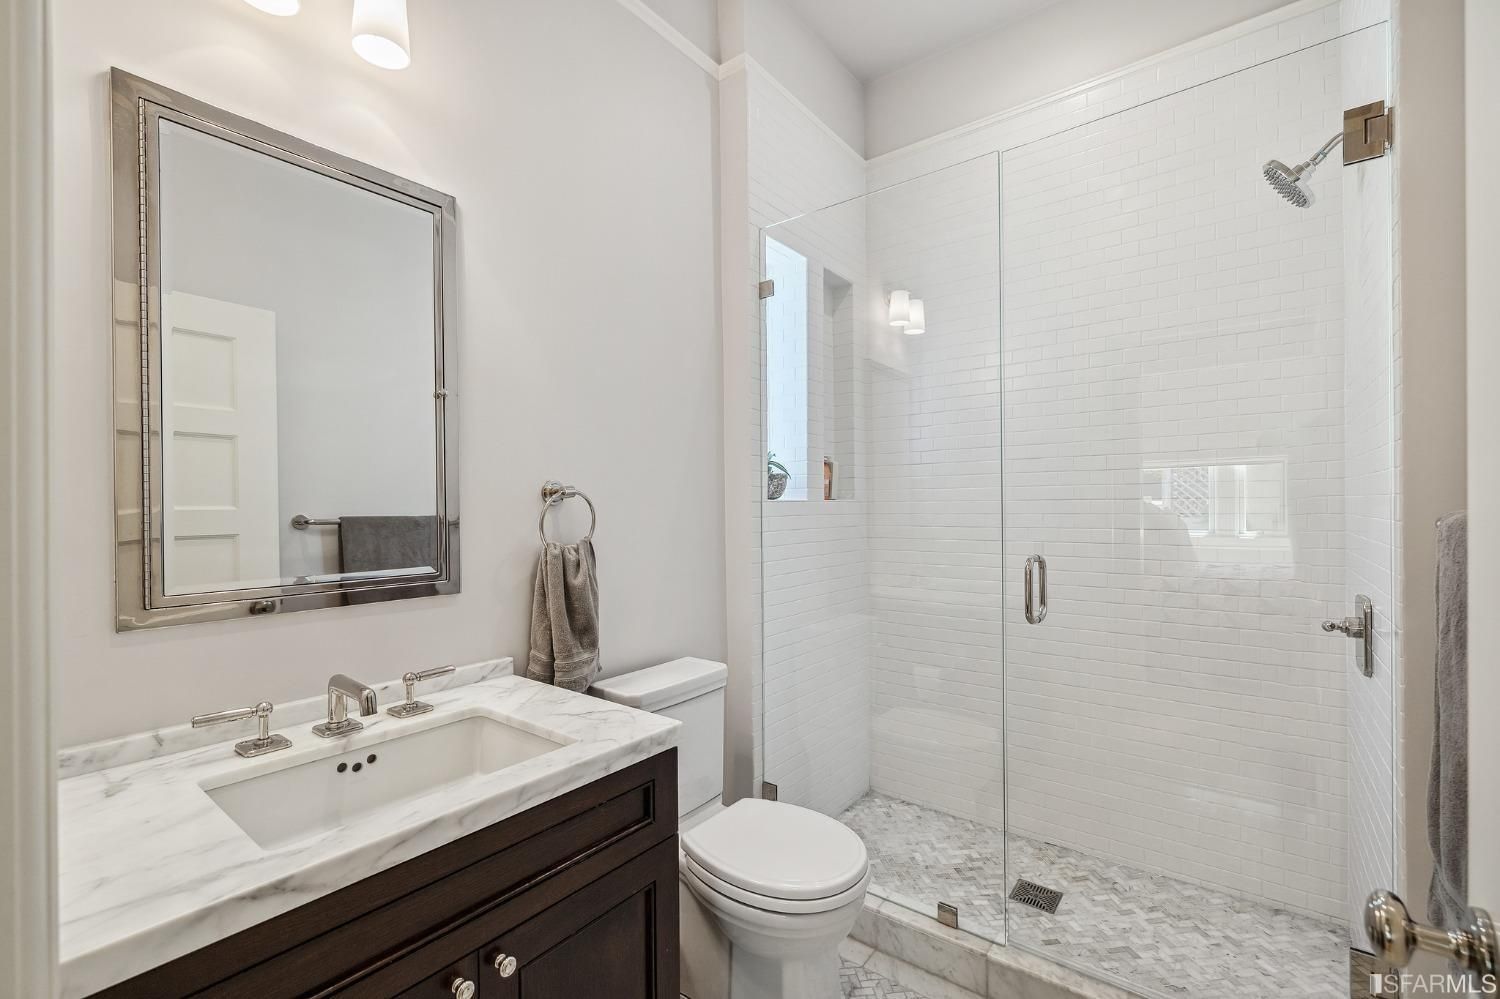 Property Photo: Bathroom with glass shower